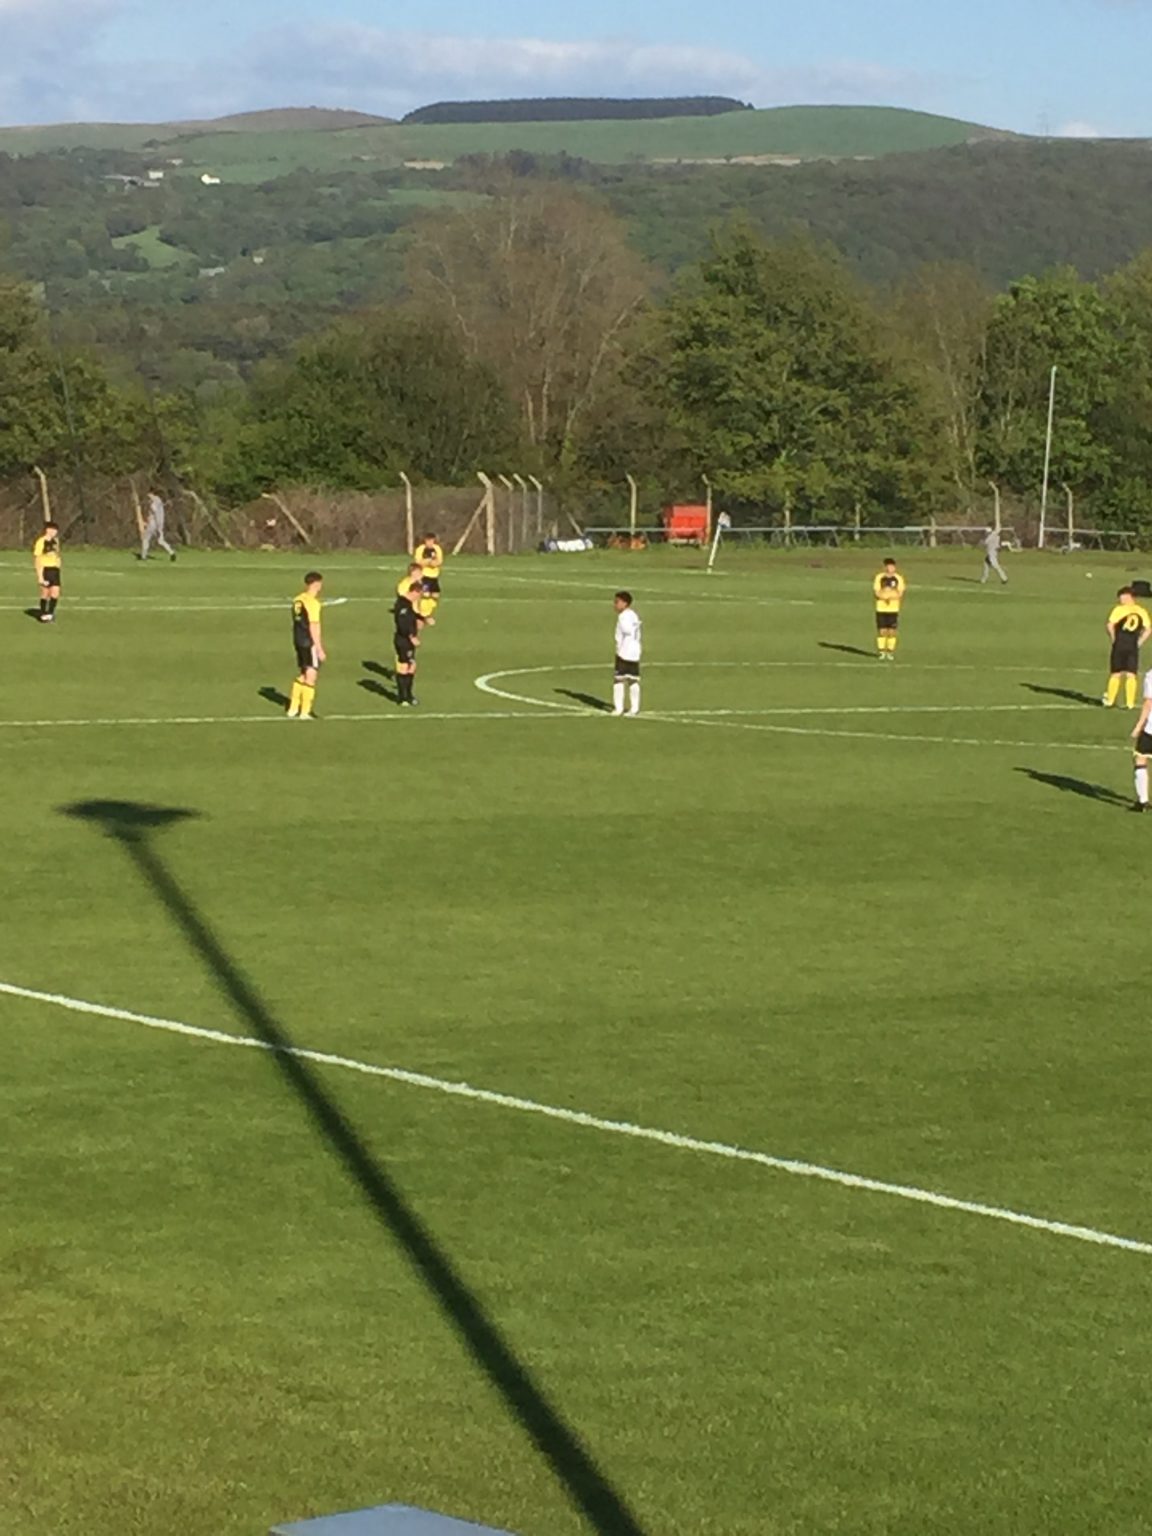 MID WEEK FIXTURE V CAT 1 SWANSEA CITY ACADEMY Played a solid 90 minutes in centre mid and loving the